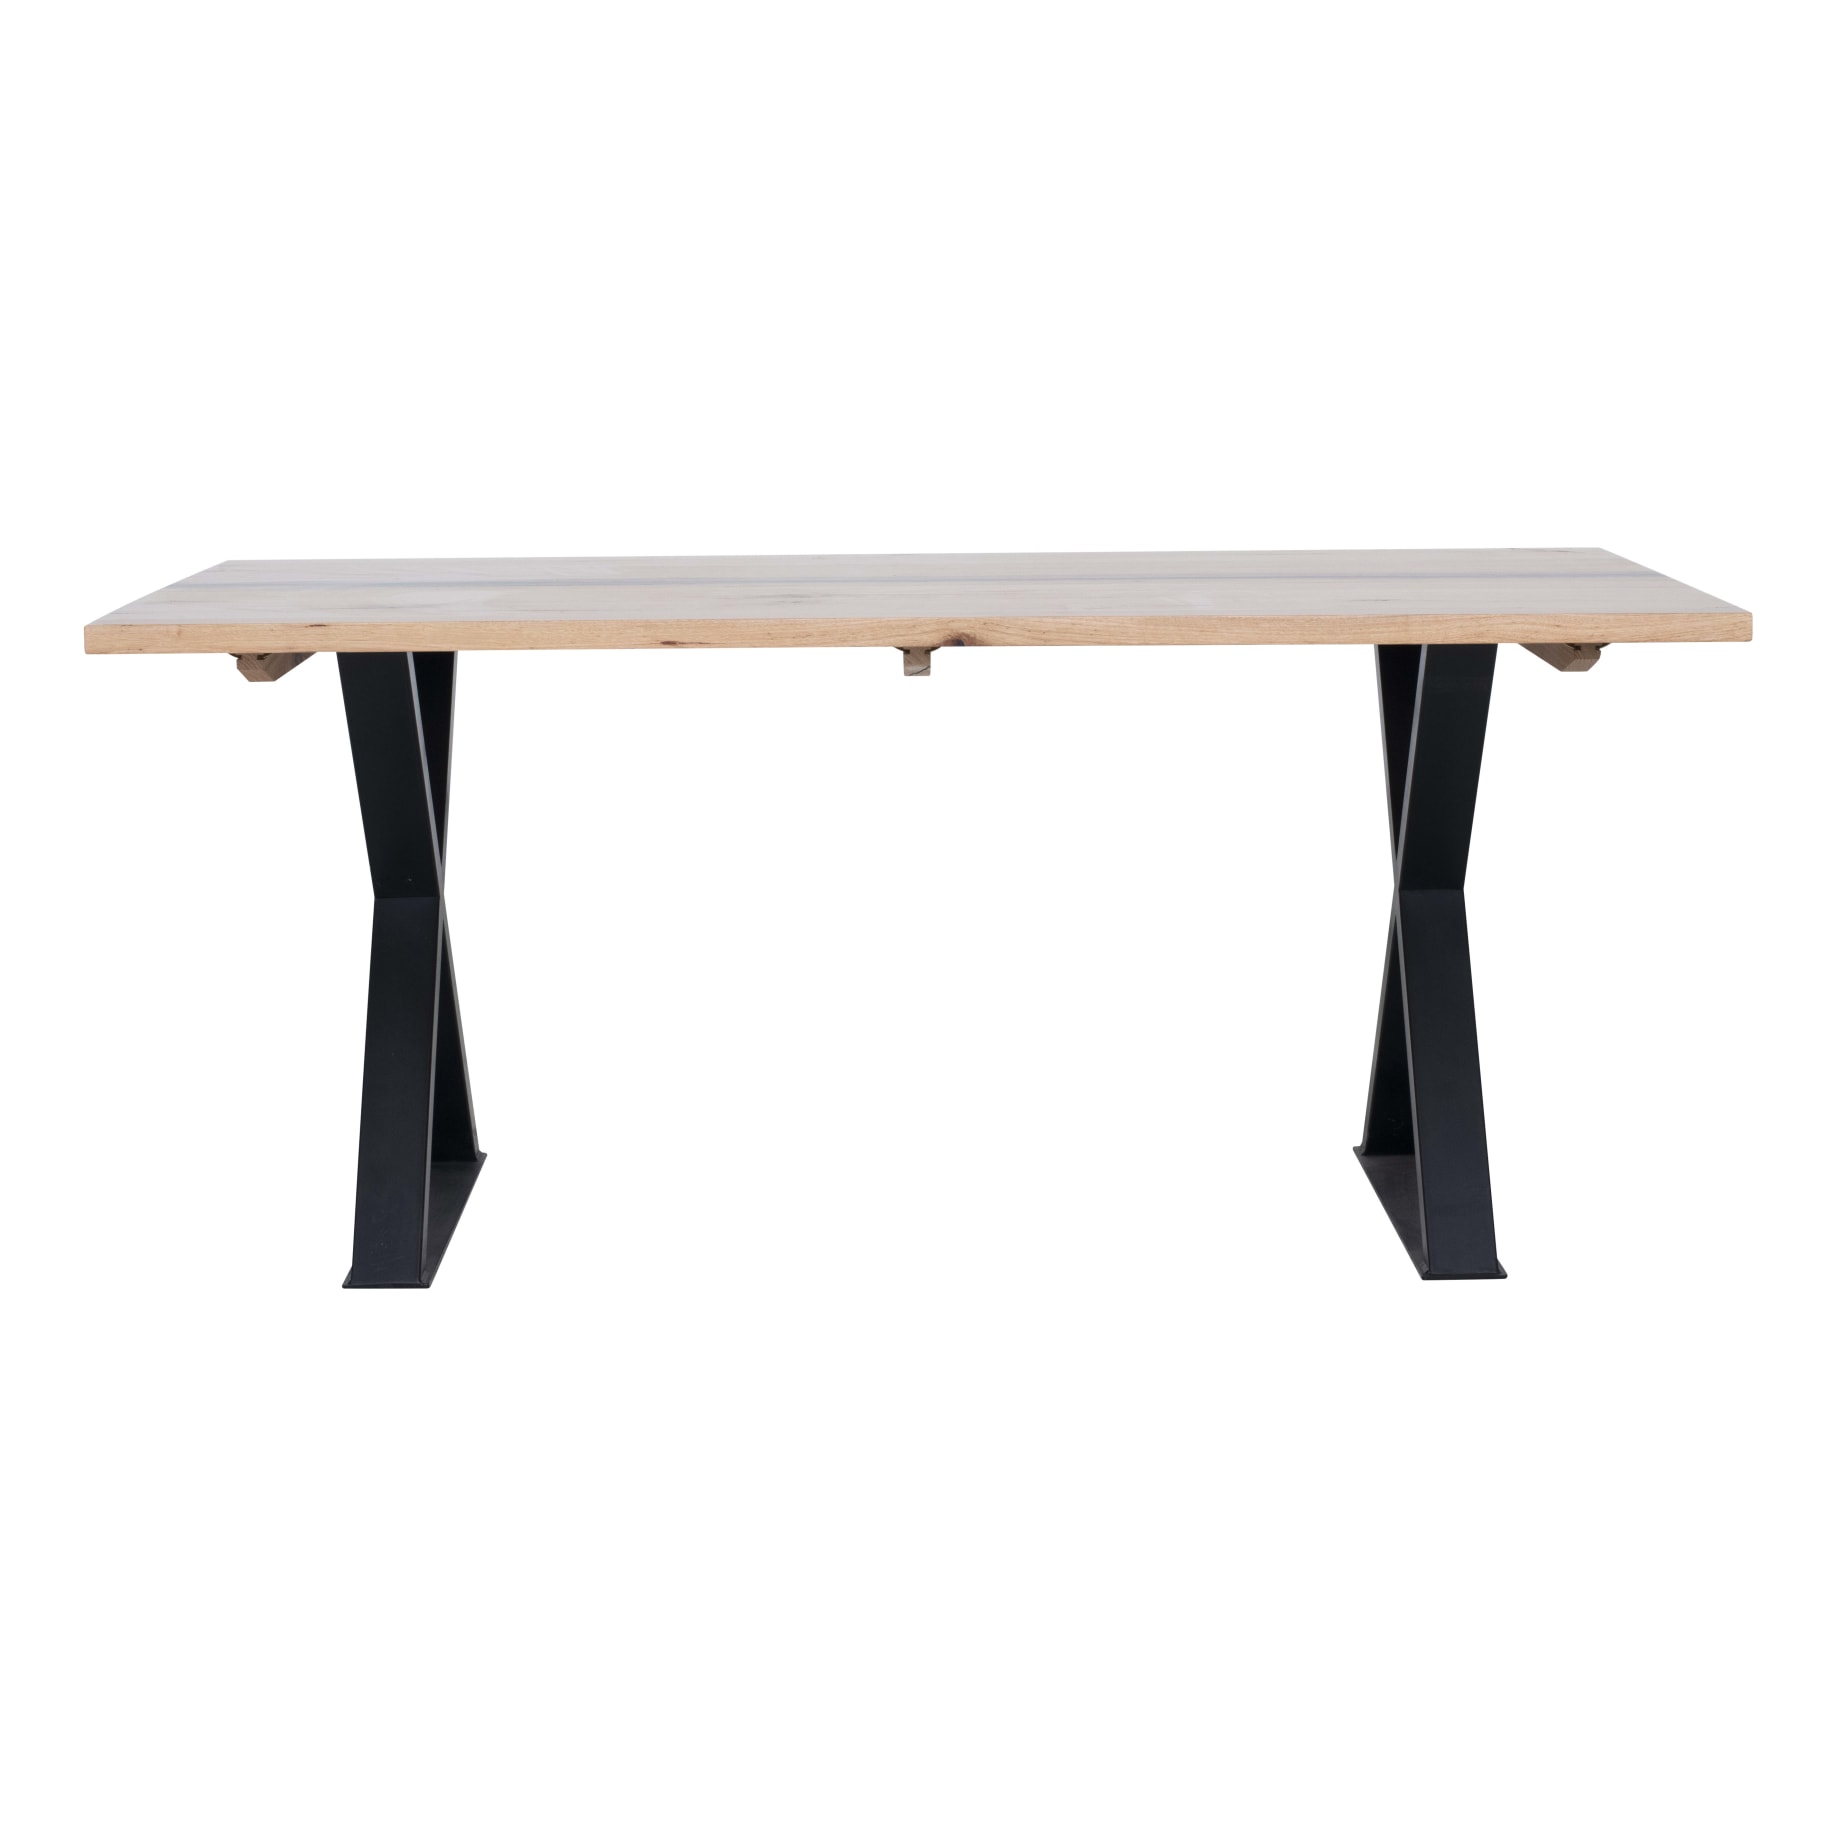 Rawson Dining Table 240cm in Messmate with Resin